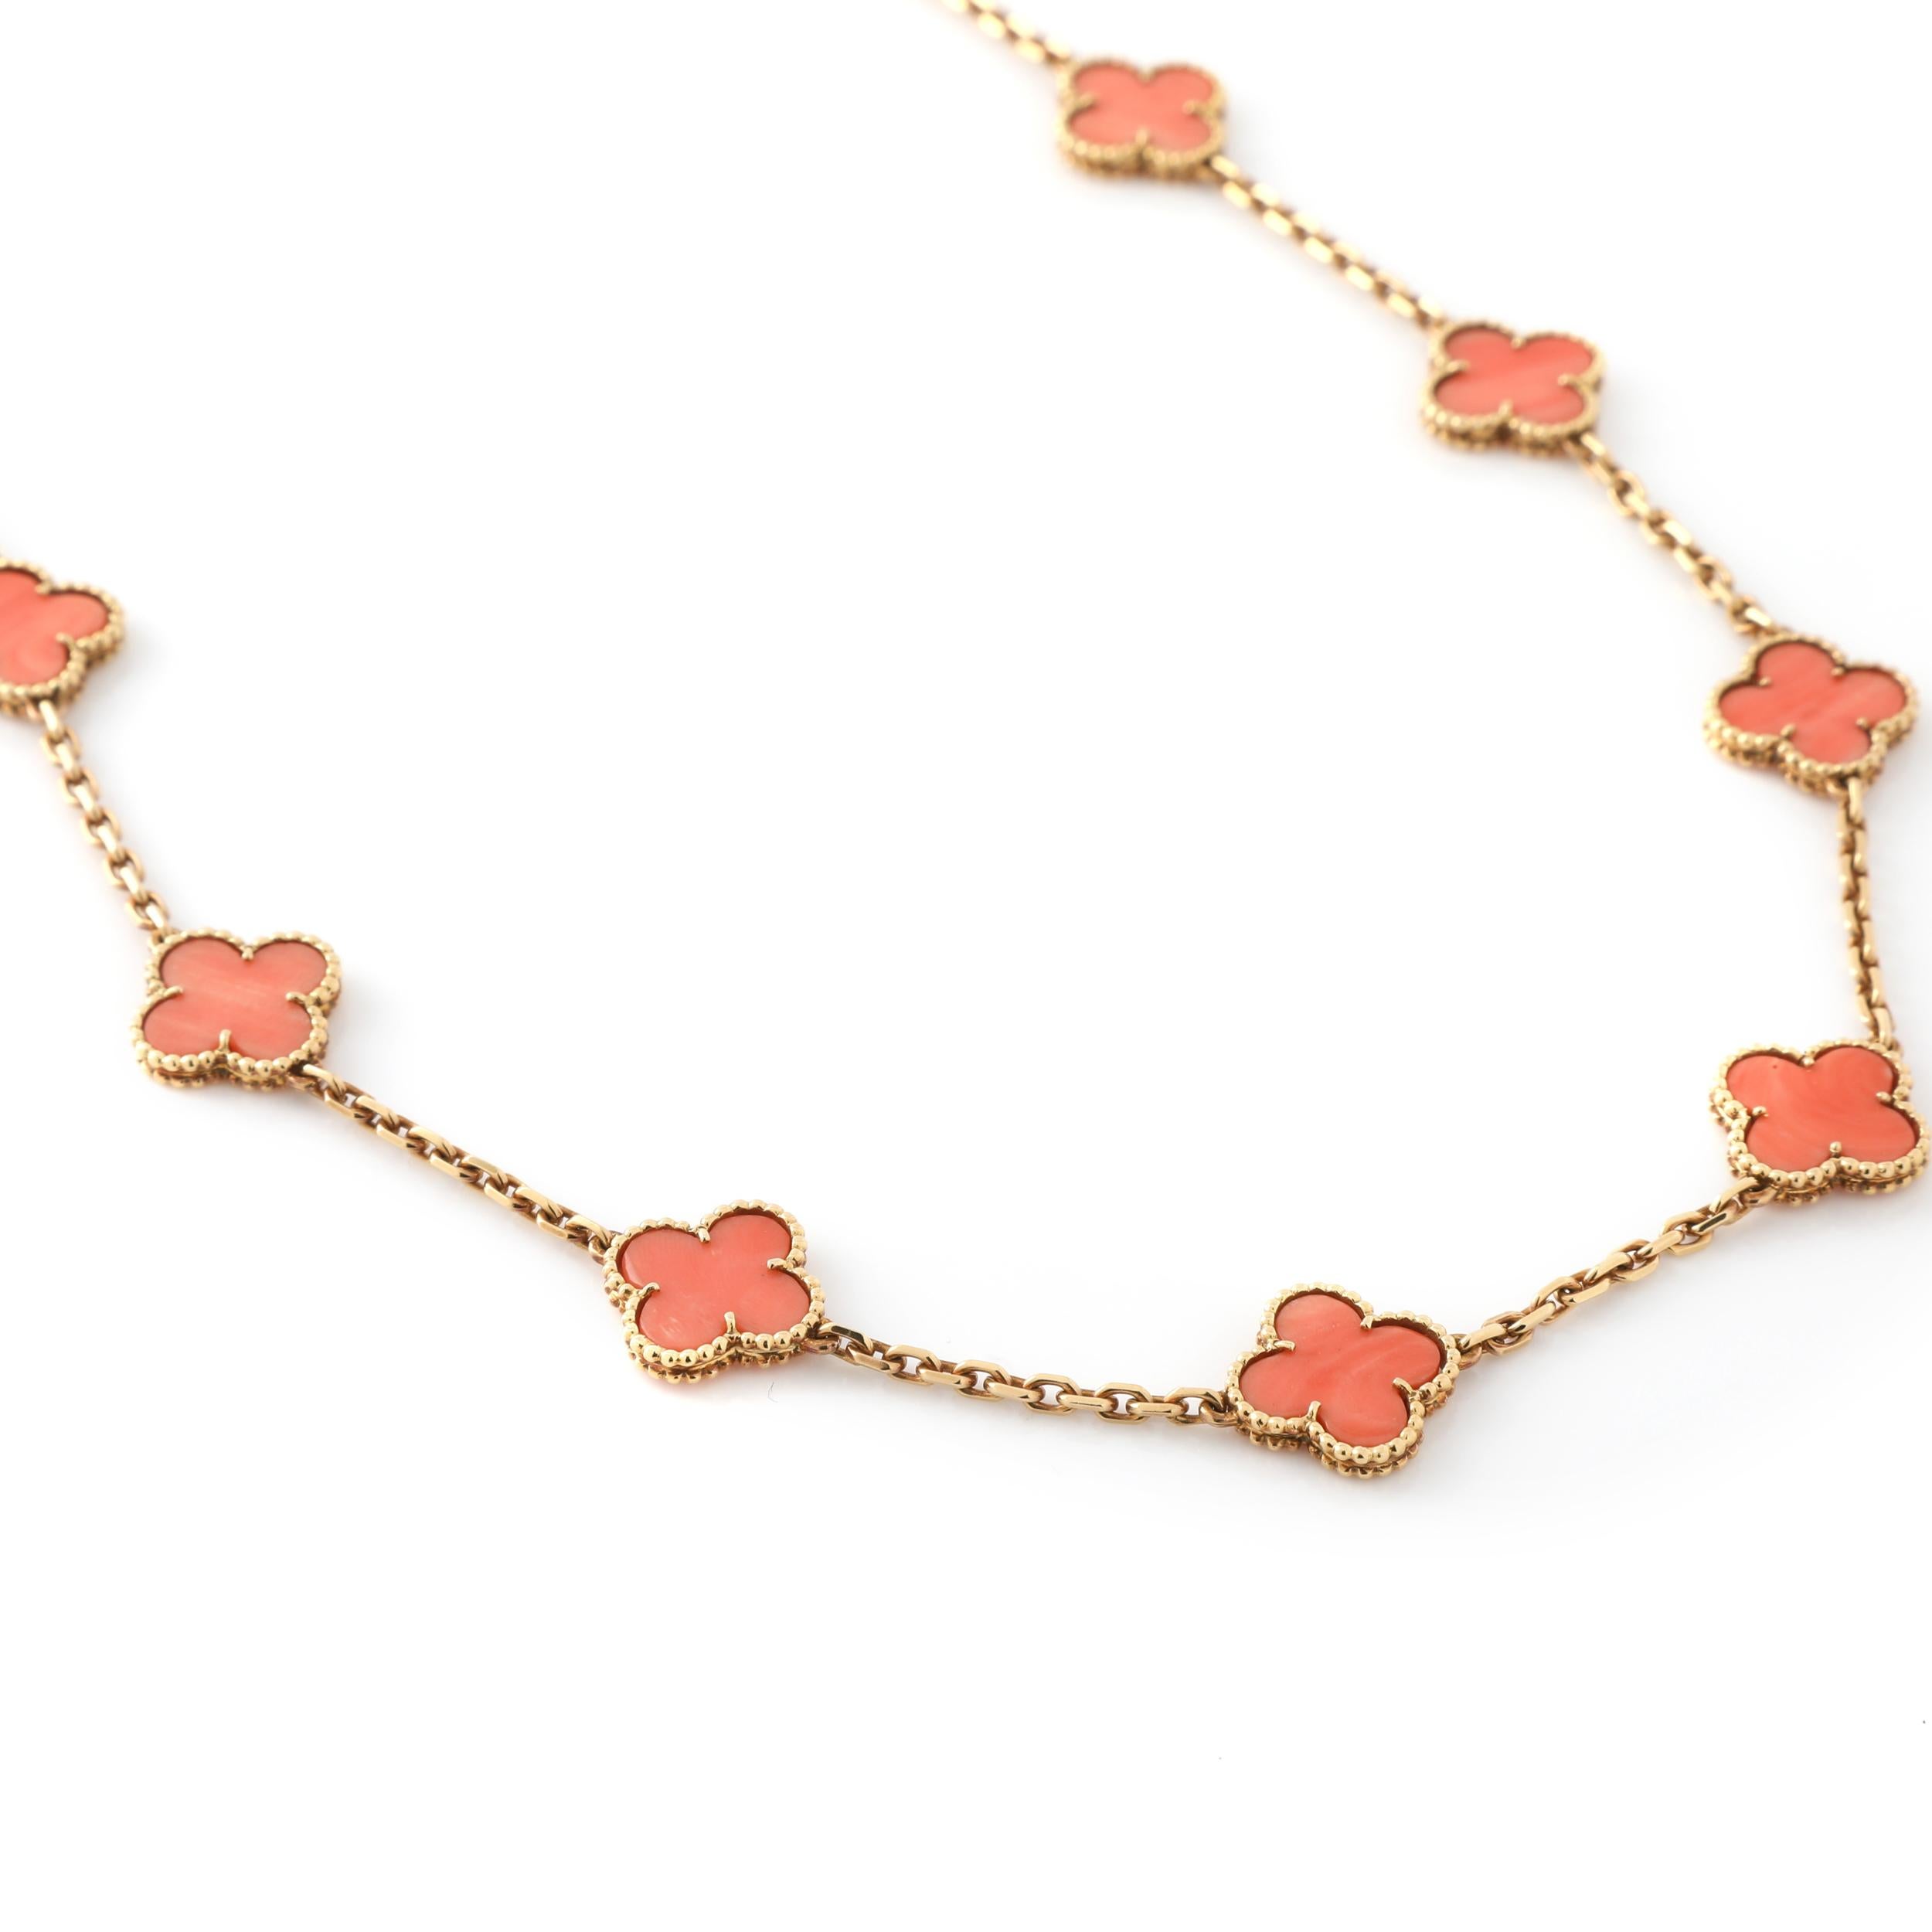 An incredible Van Cleef & Arpels Vintage Alhambra 20 motif necklace in 18k yellow gold and coral. 

One of the rarest and most iconic models in the Alhambra collection, not to be produced again.

Signed V.C.A 18 kt with serial number and french